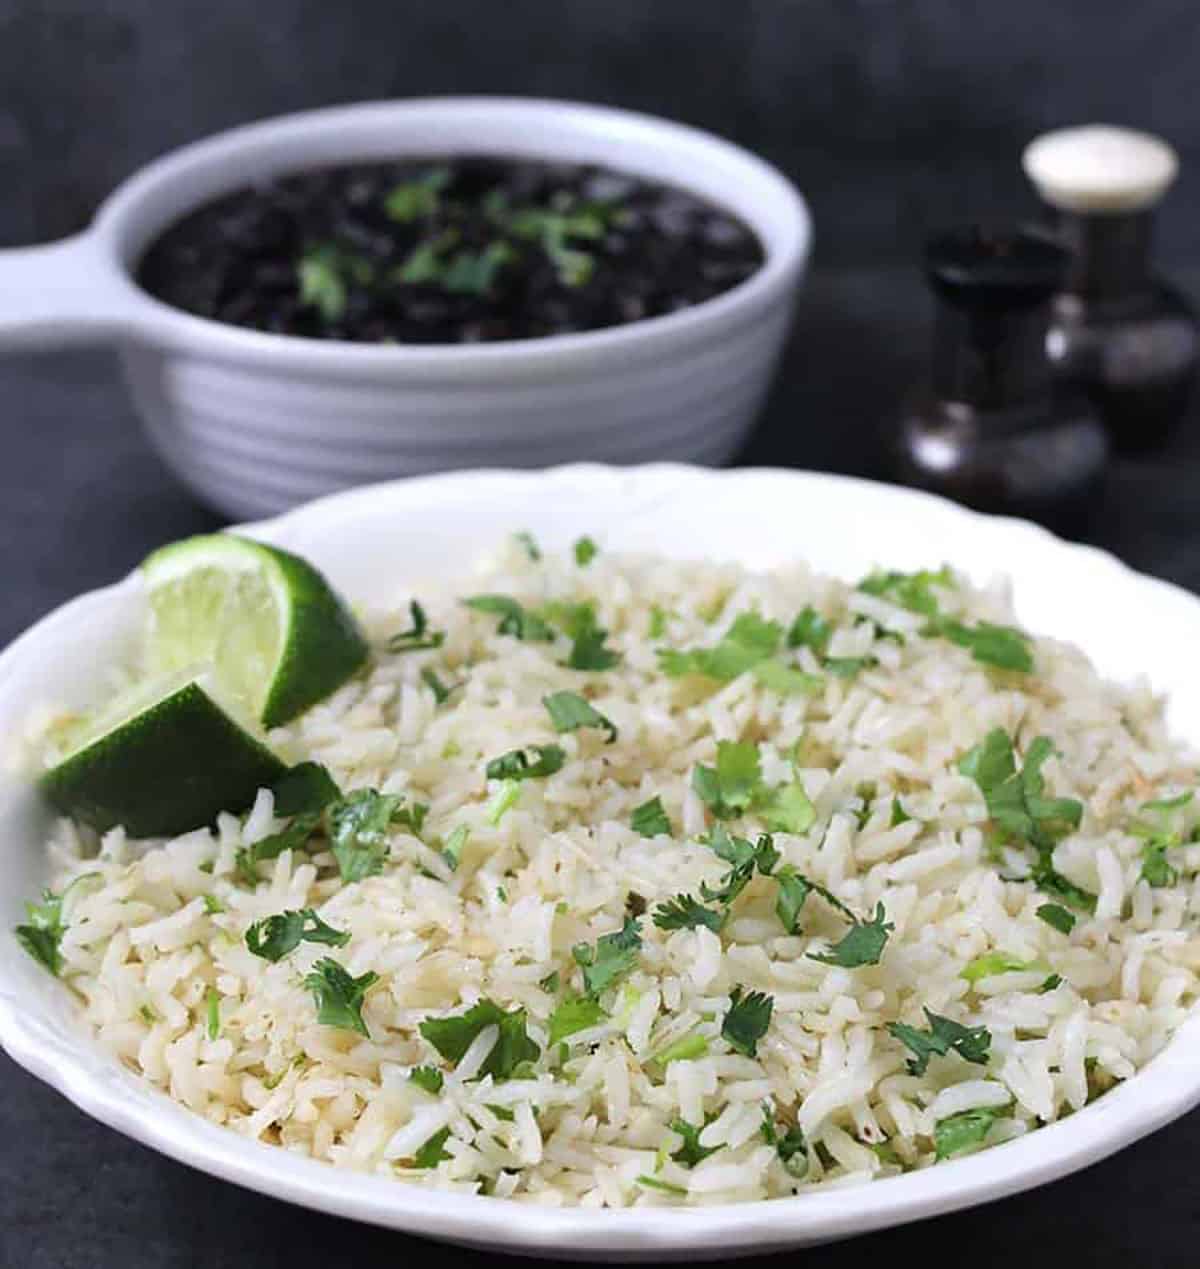 Chipotle Cilantro Lime Rice Recipe (Copycat) - Stovetop and instant pot instructions added. 